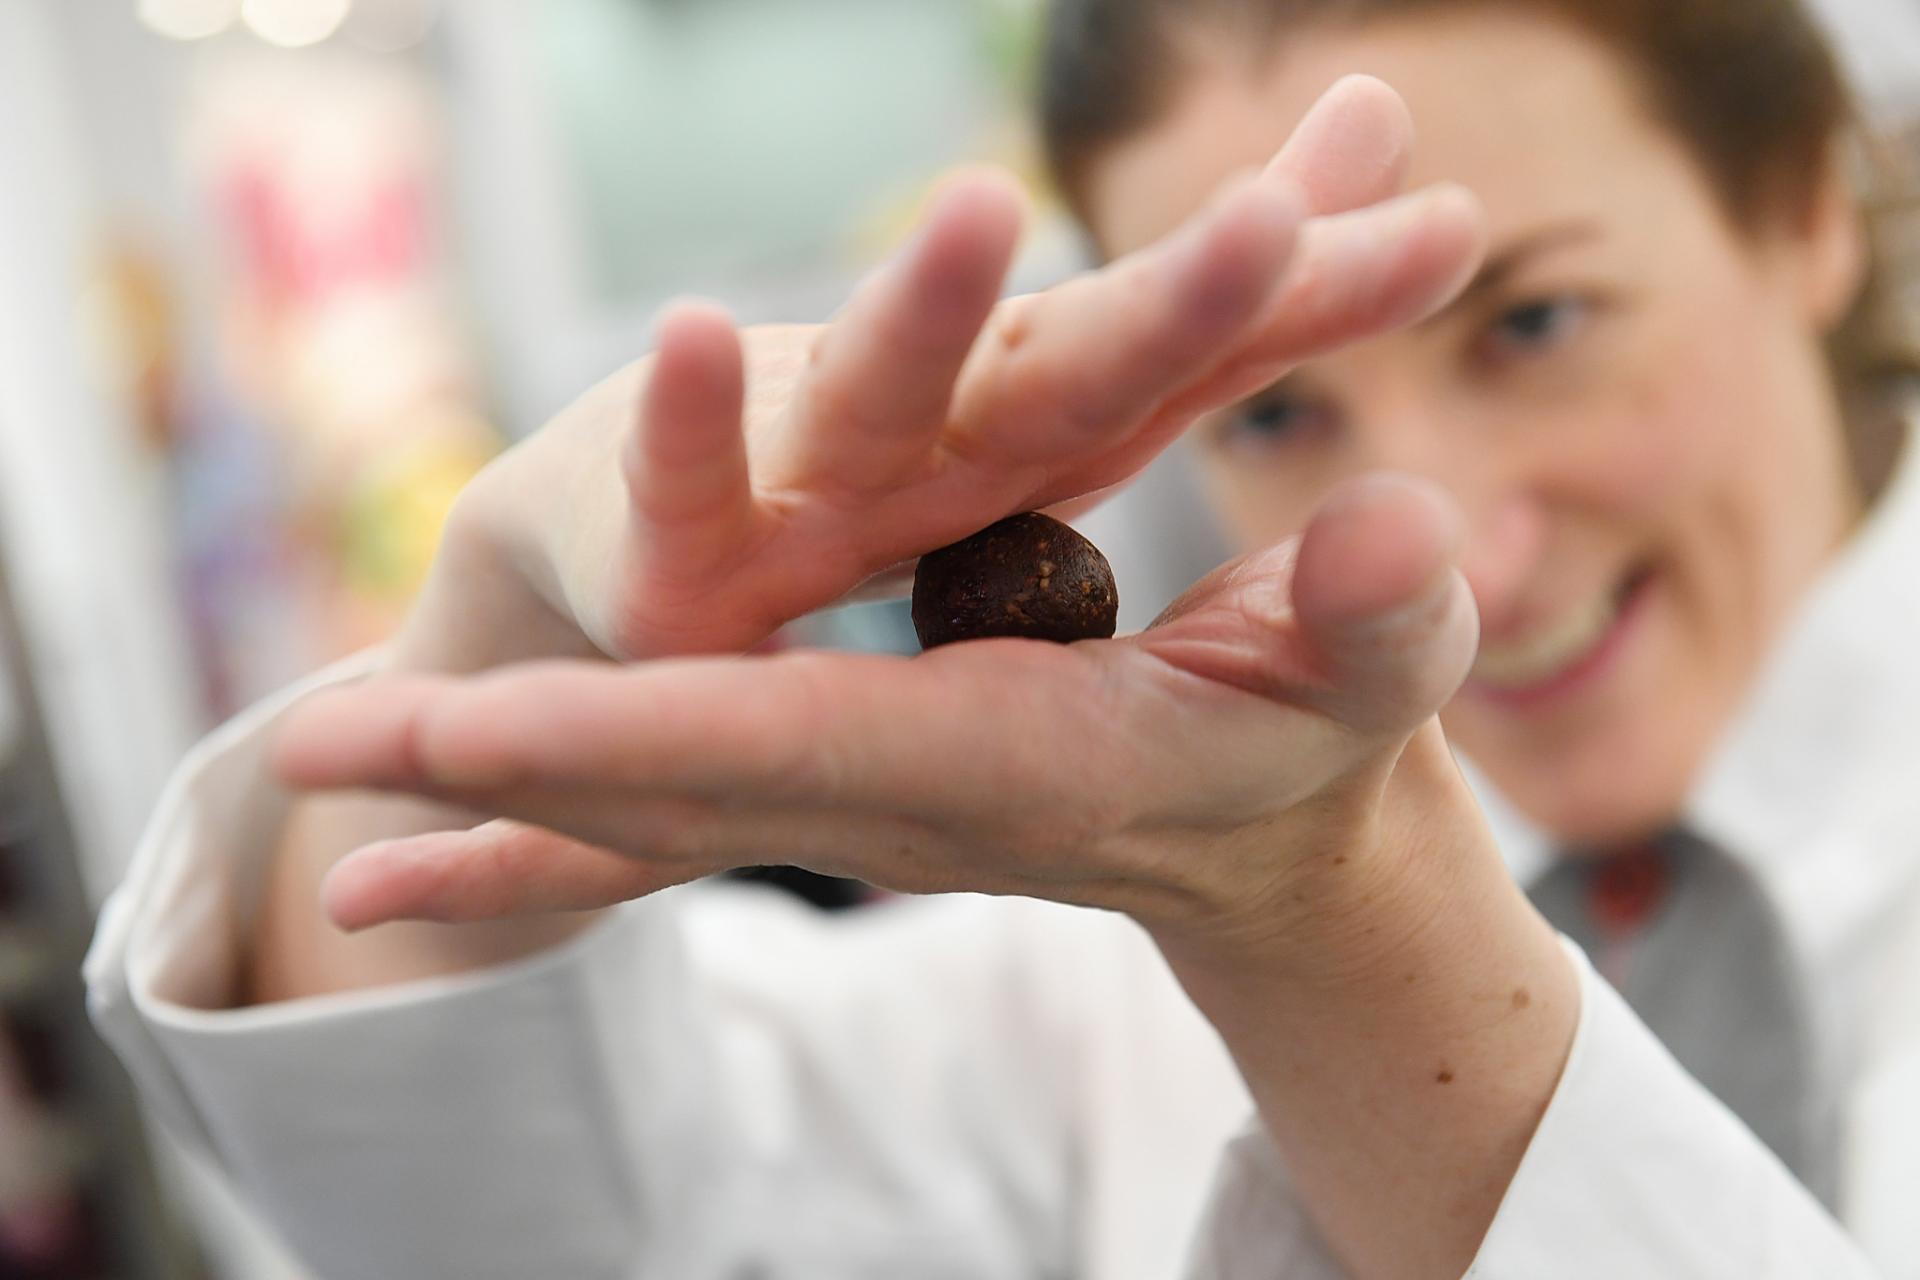 Barry Callebaut cocoa and chocolate expertise